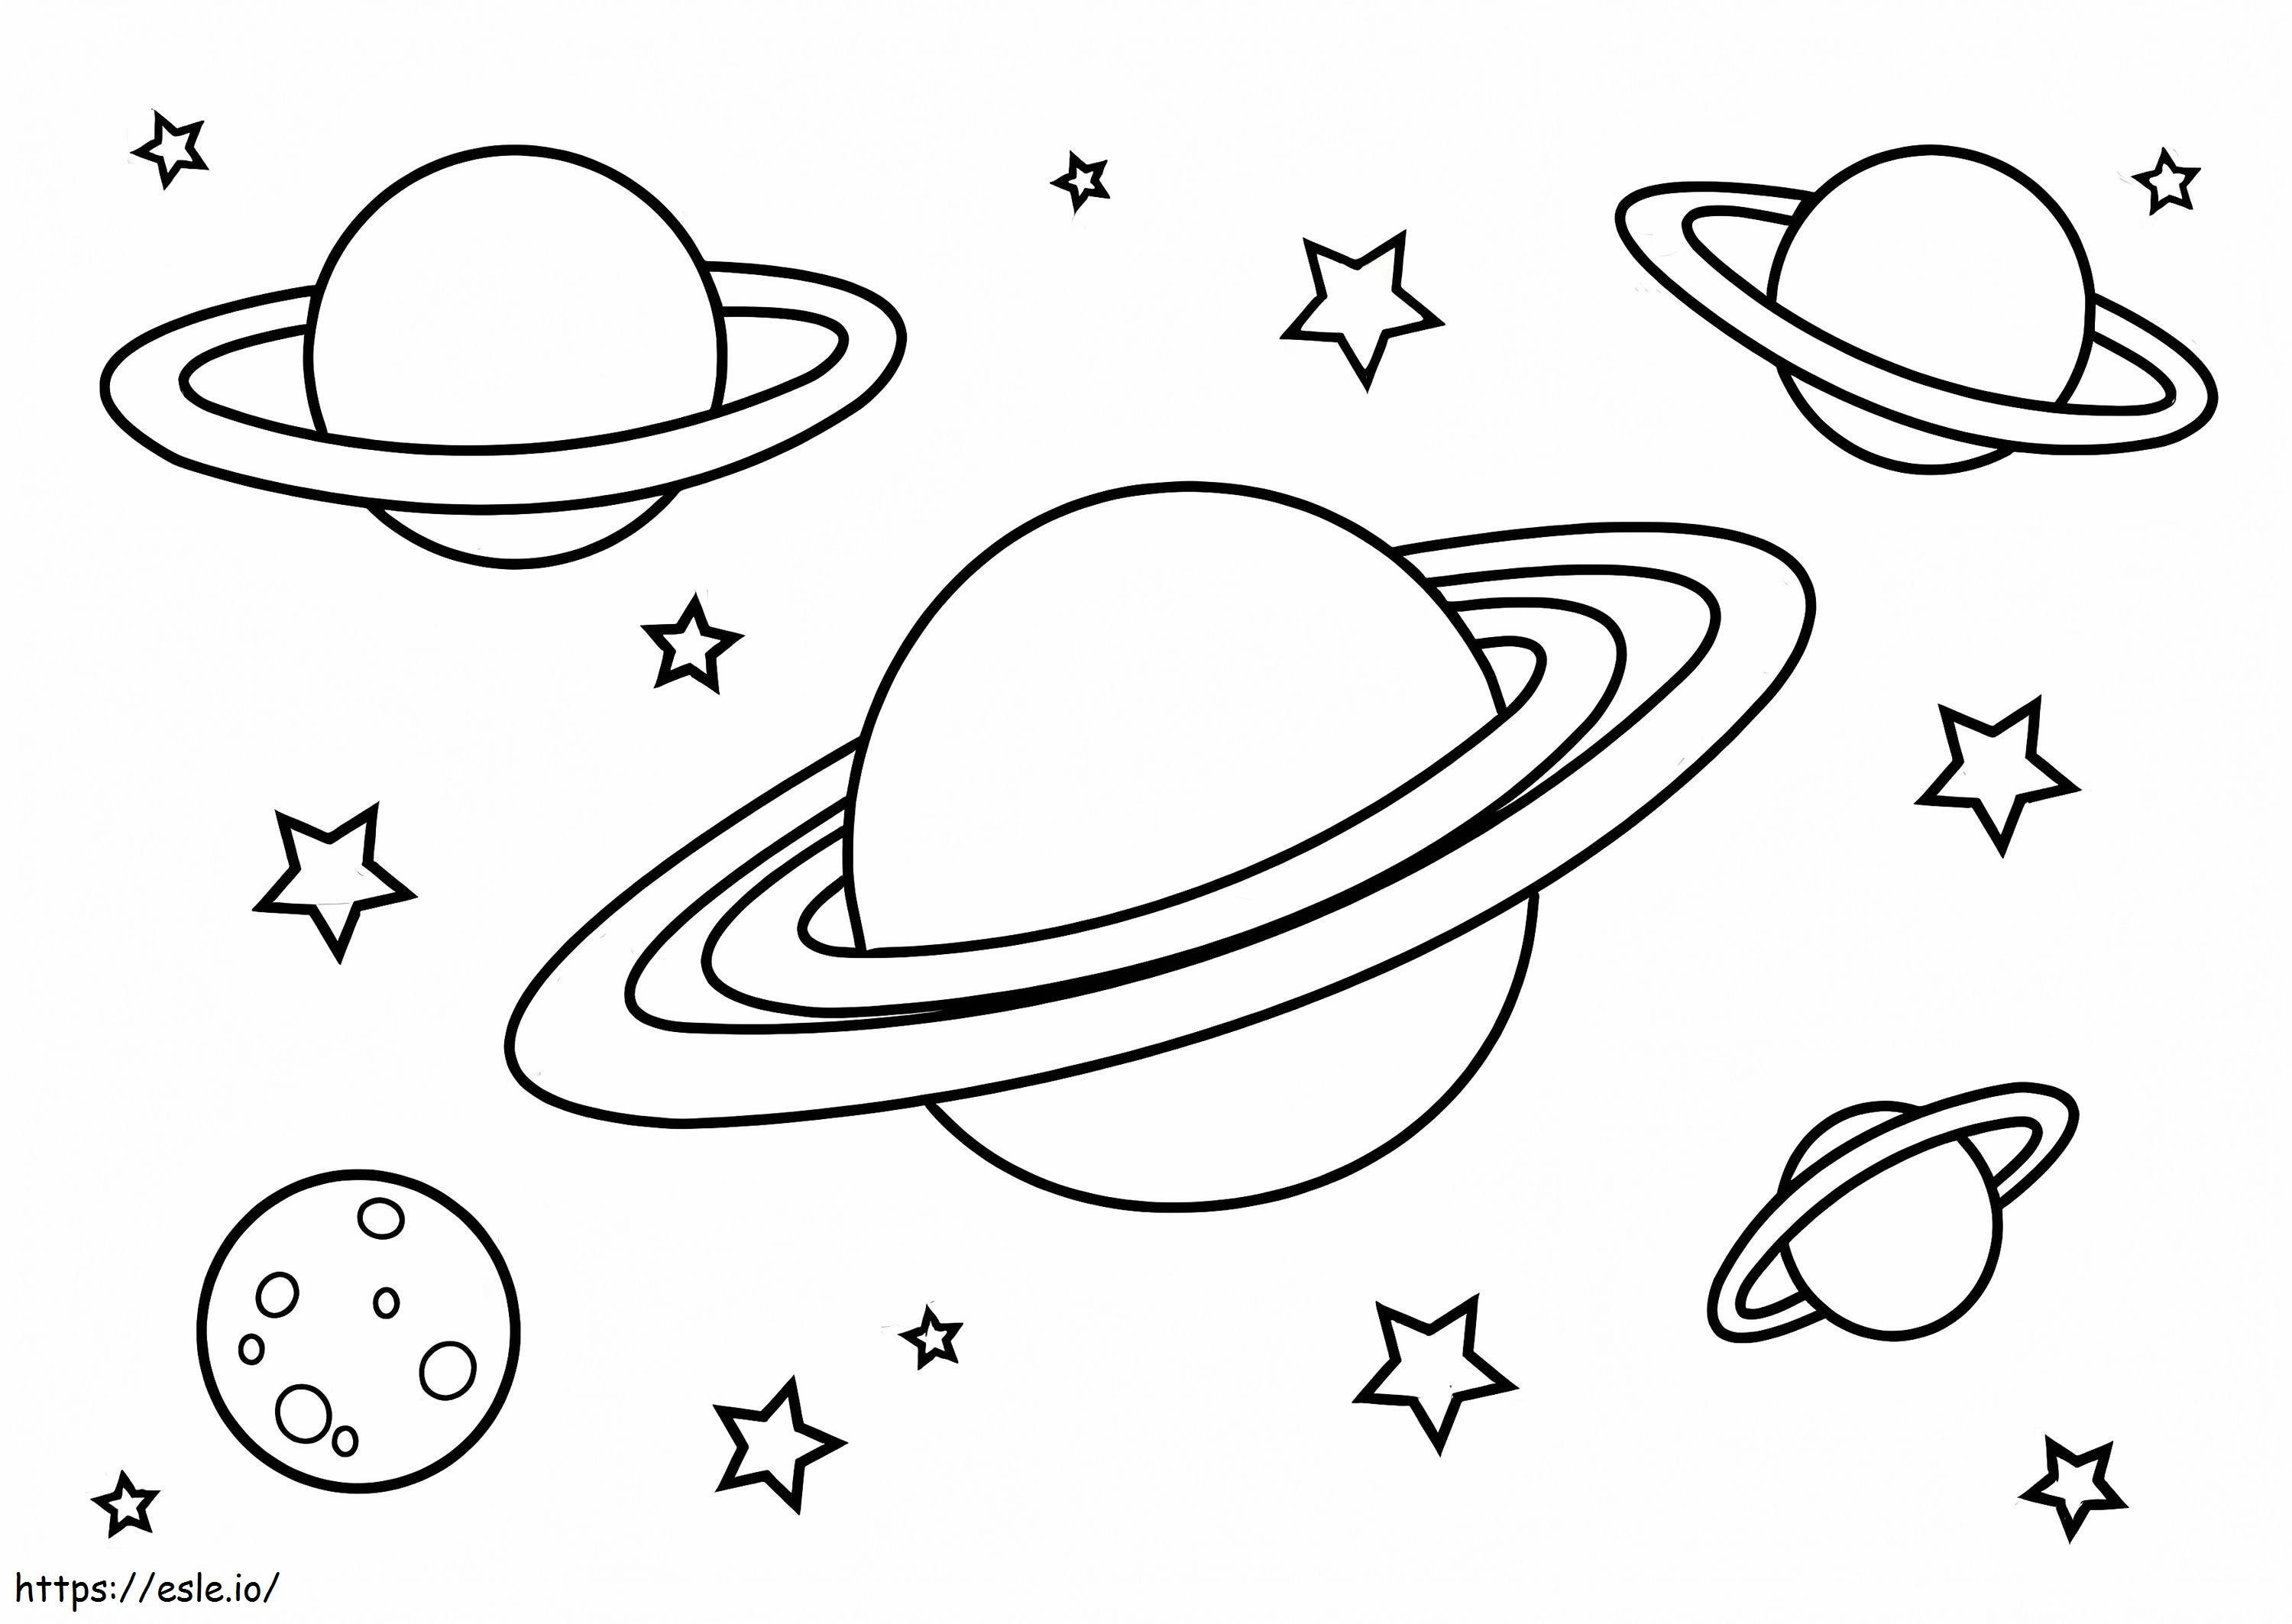 Awesome Planets coloring page